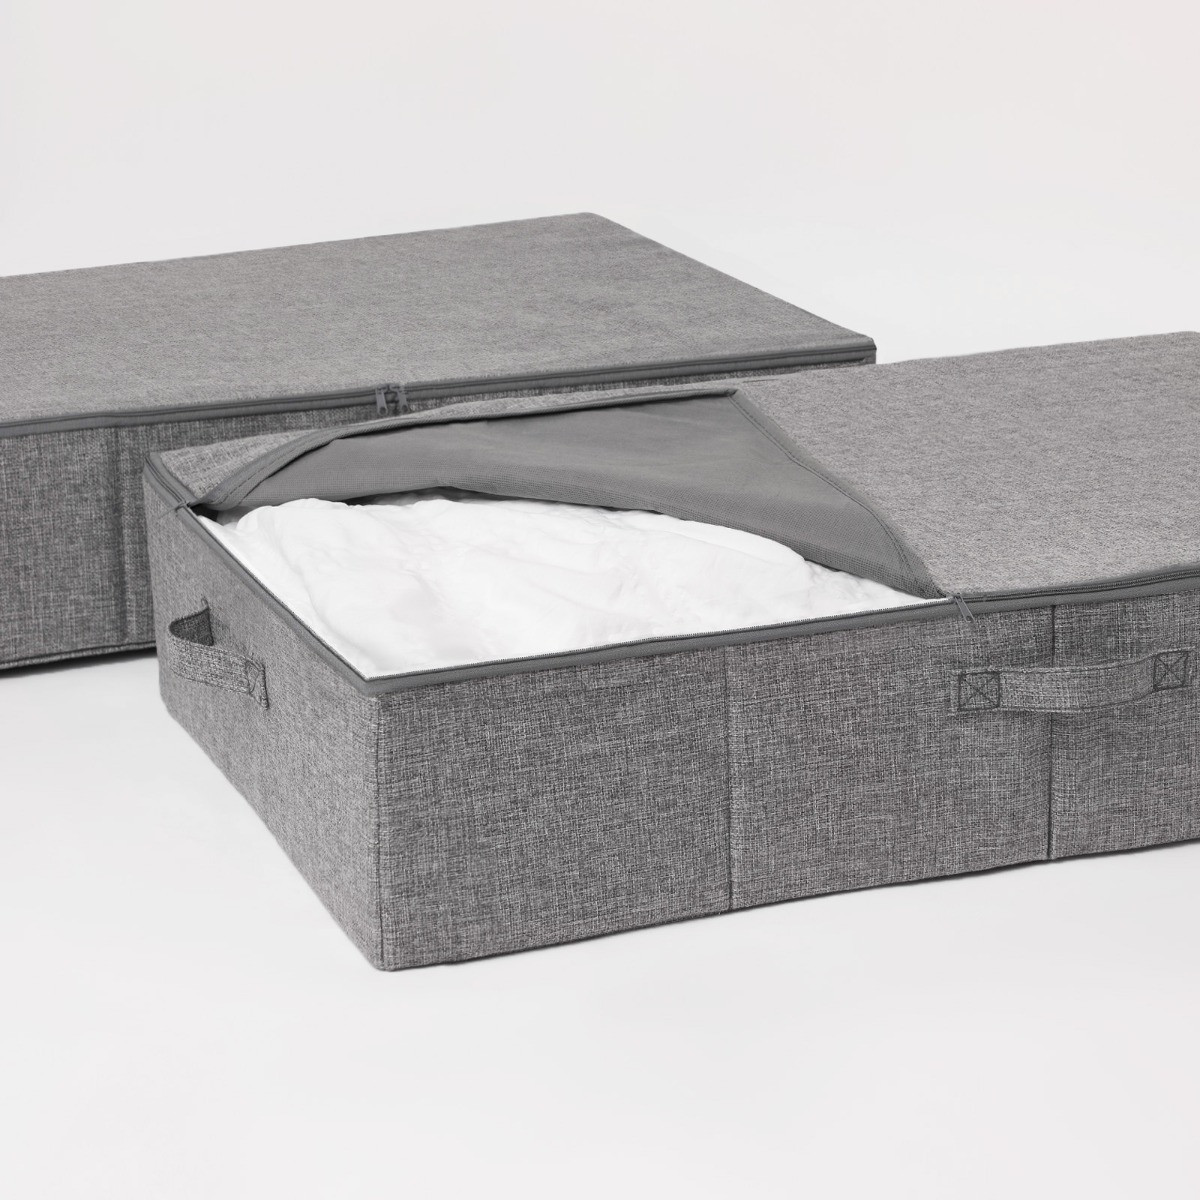 OHS Faux Linen Underbed Storage Bag, Charcoal - 2 Pack>